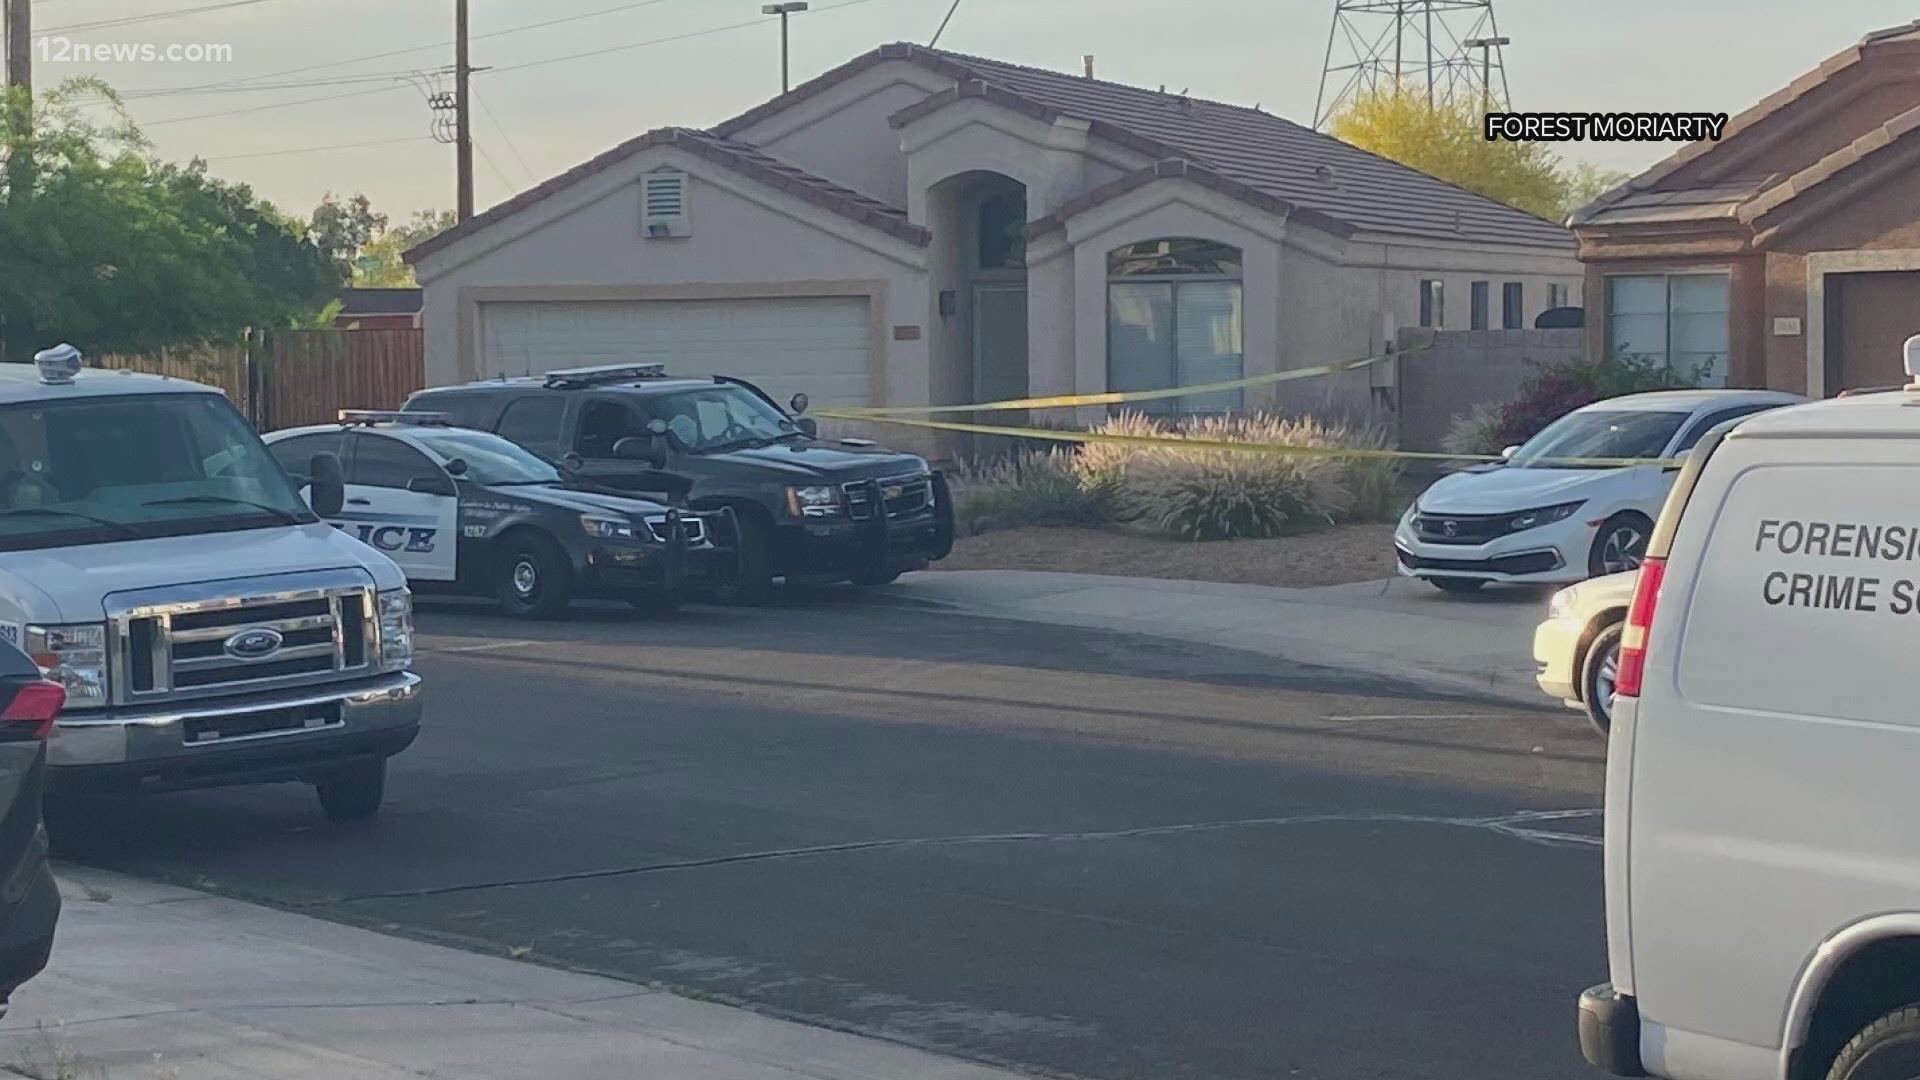 Mesa police were called to a house Wednesday night for a report of a woman with an eye injury. They found the woman but also found a child, a man and two dogs dead.